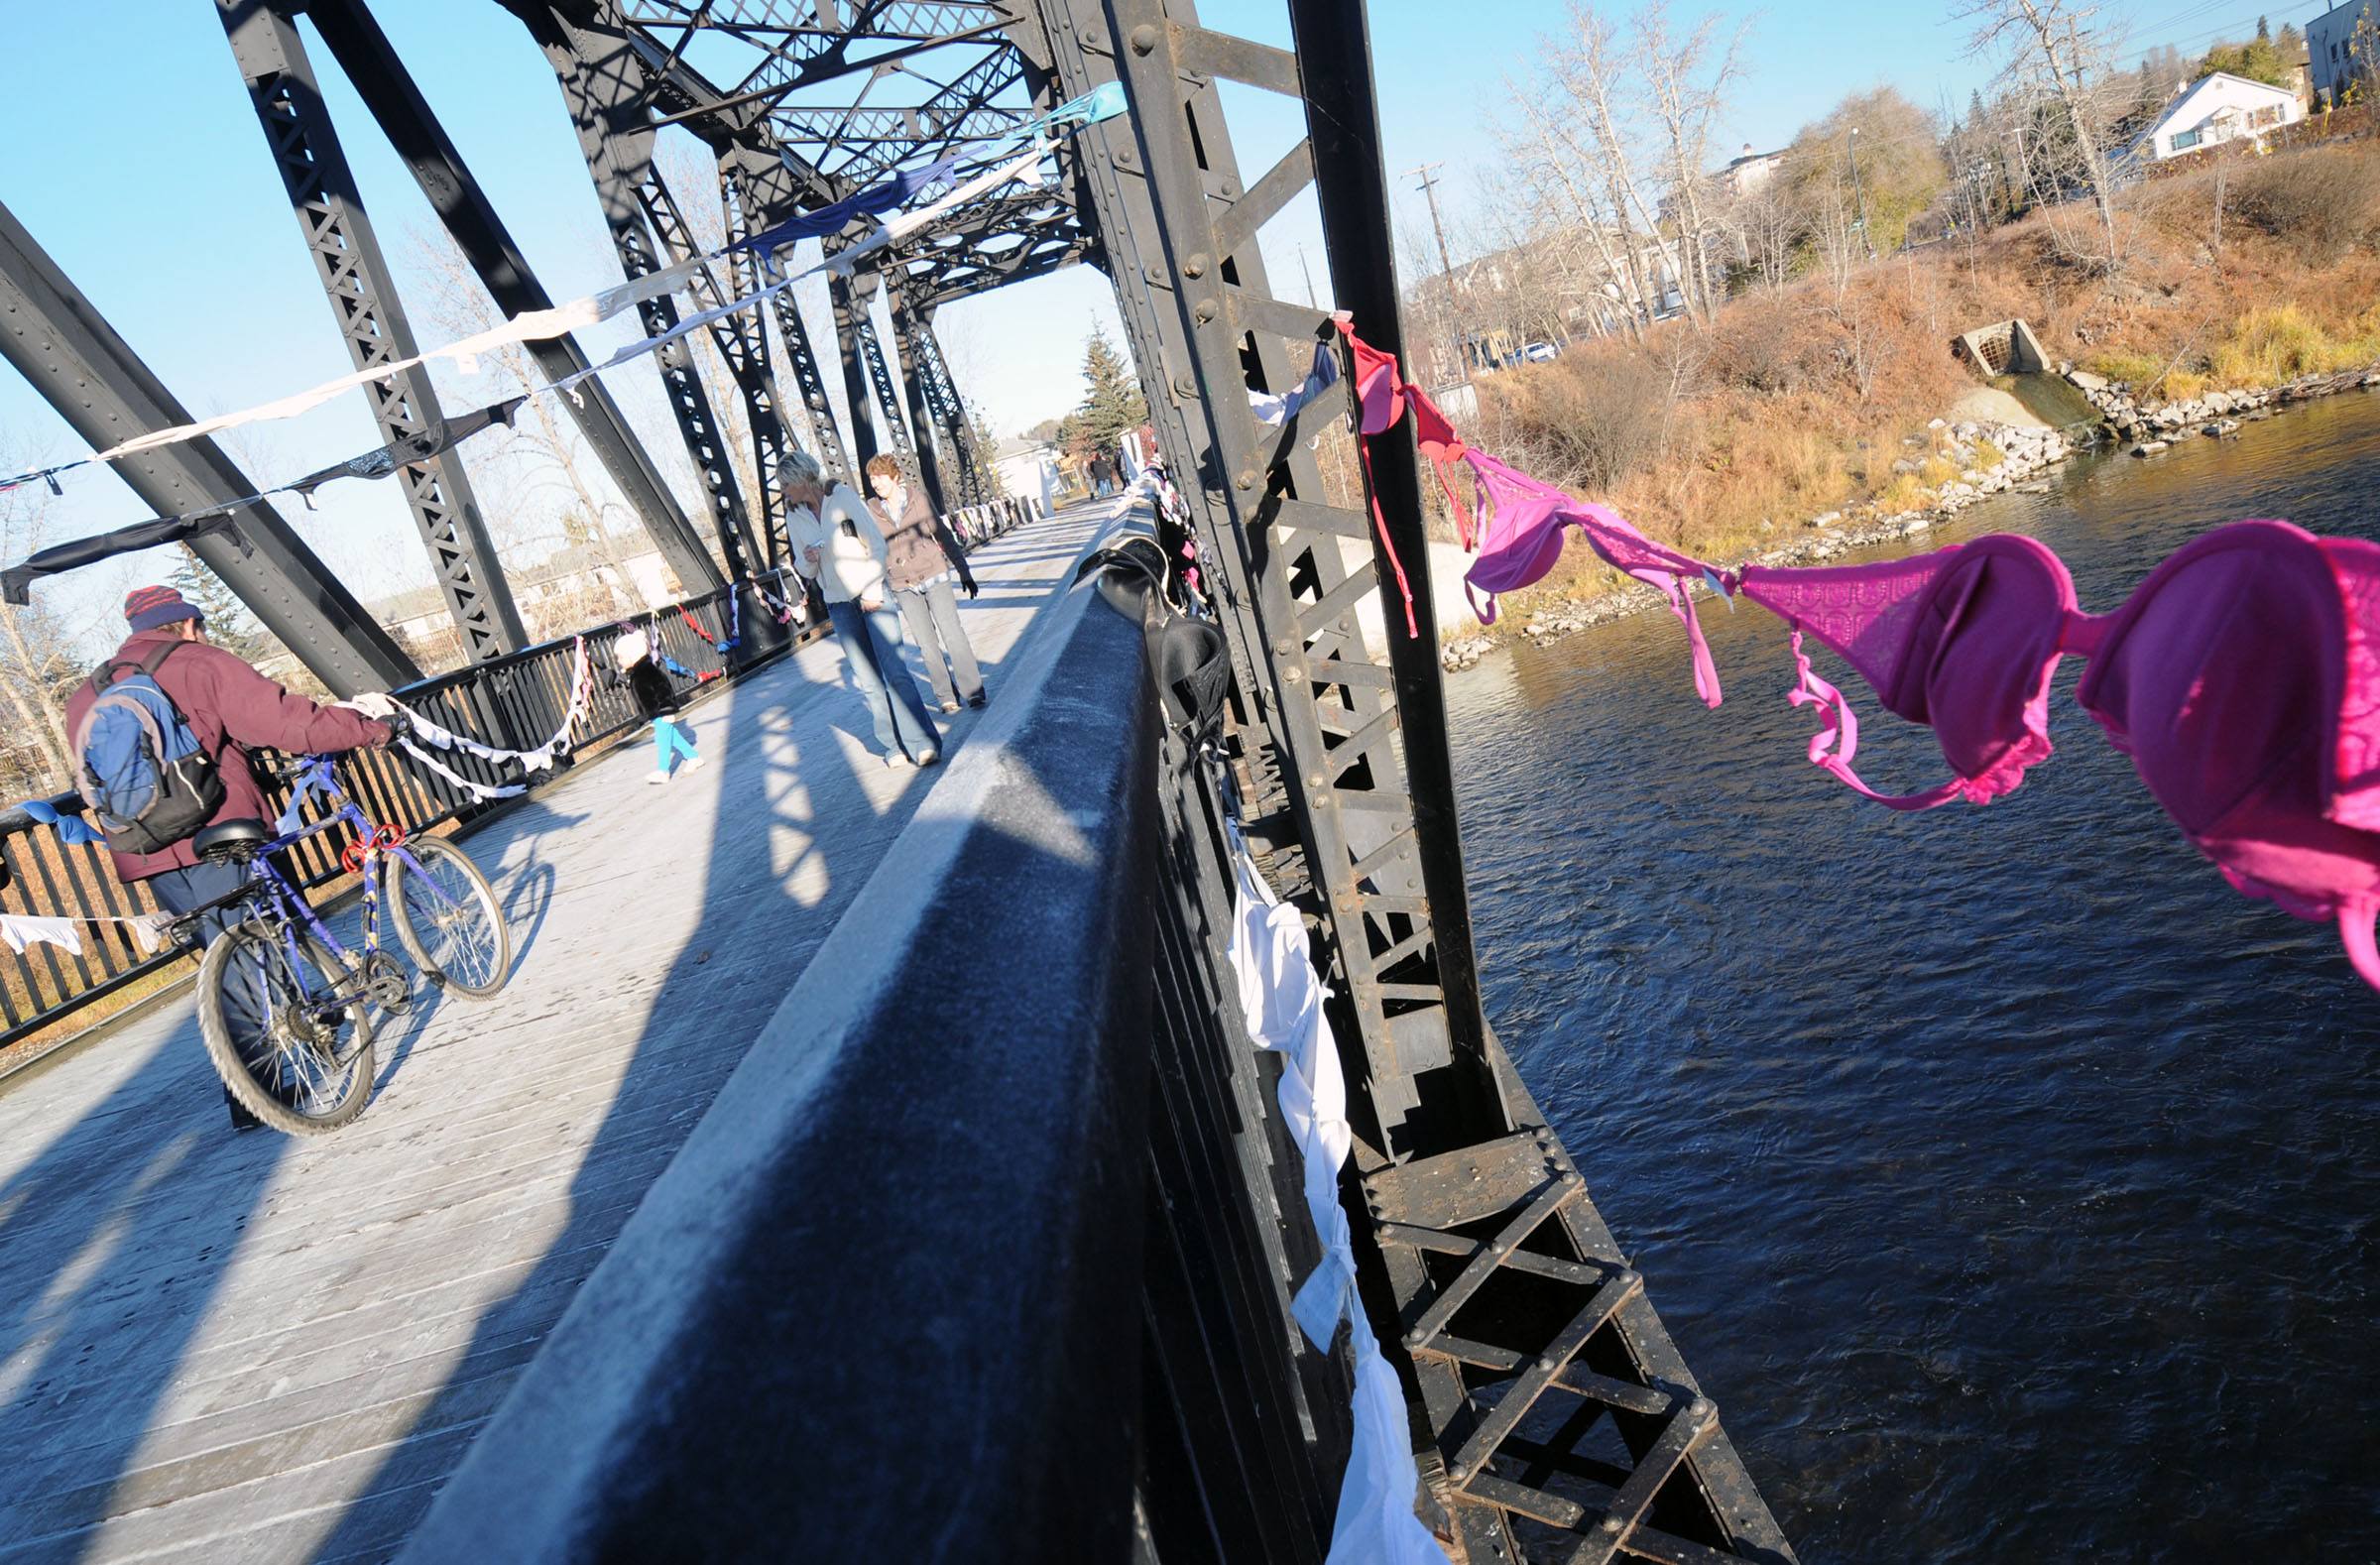 NEW DECORATIONS- In connection with the Bras Across the River campaign